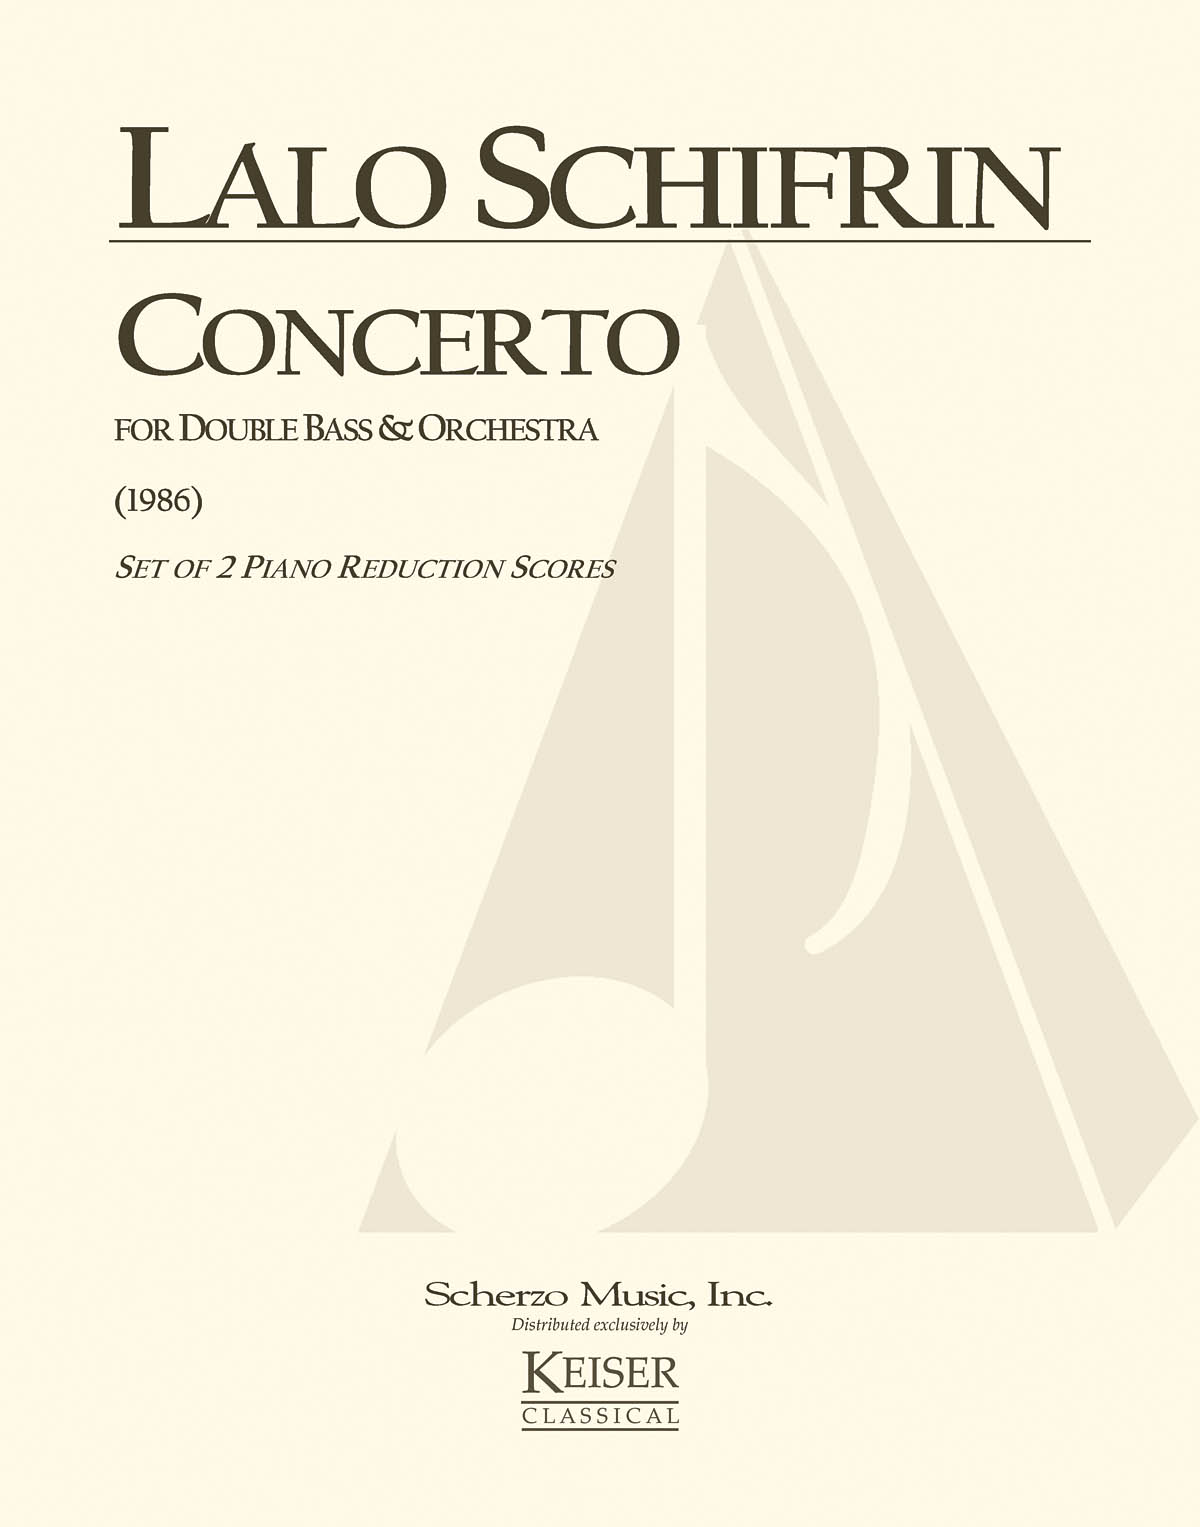 Concerto for Double Bass and Orchestra